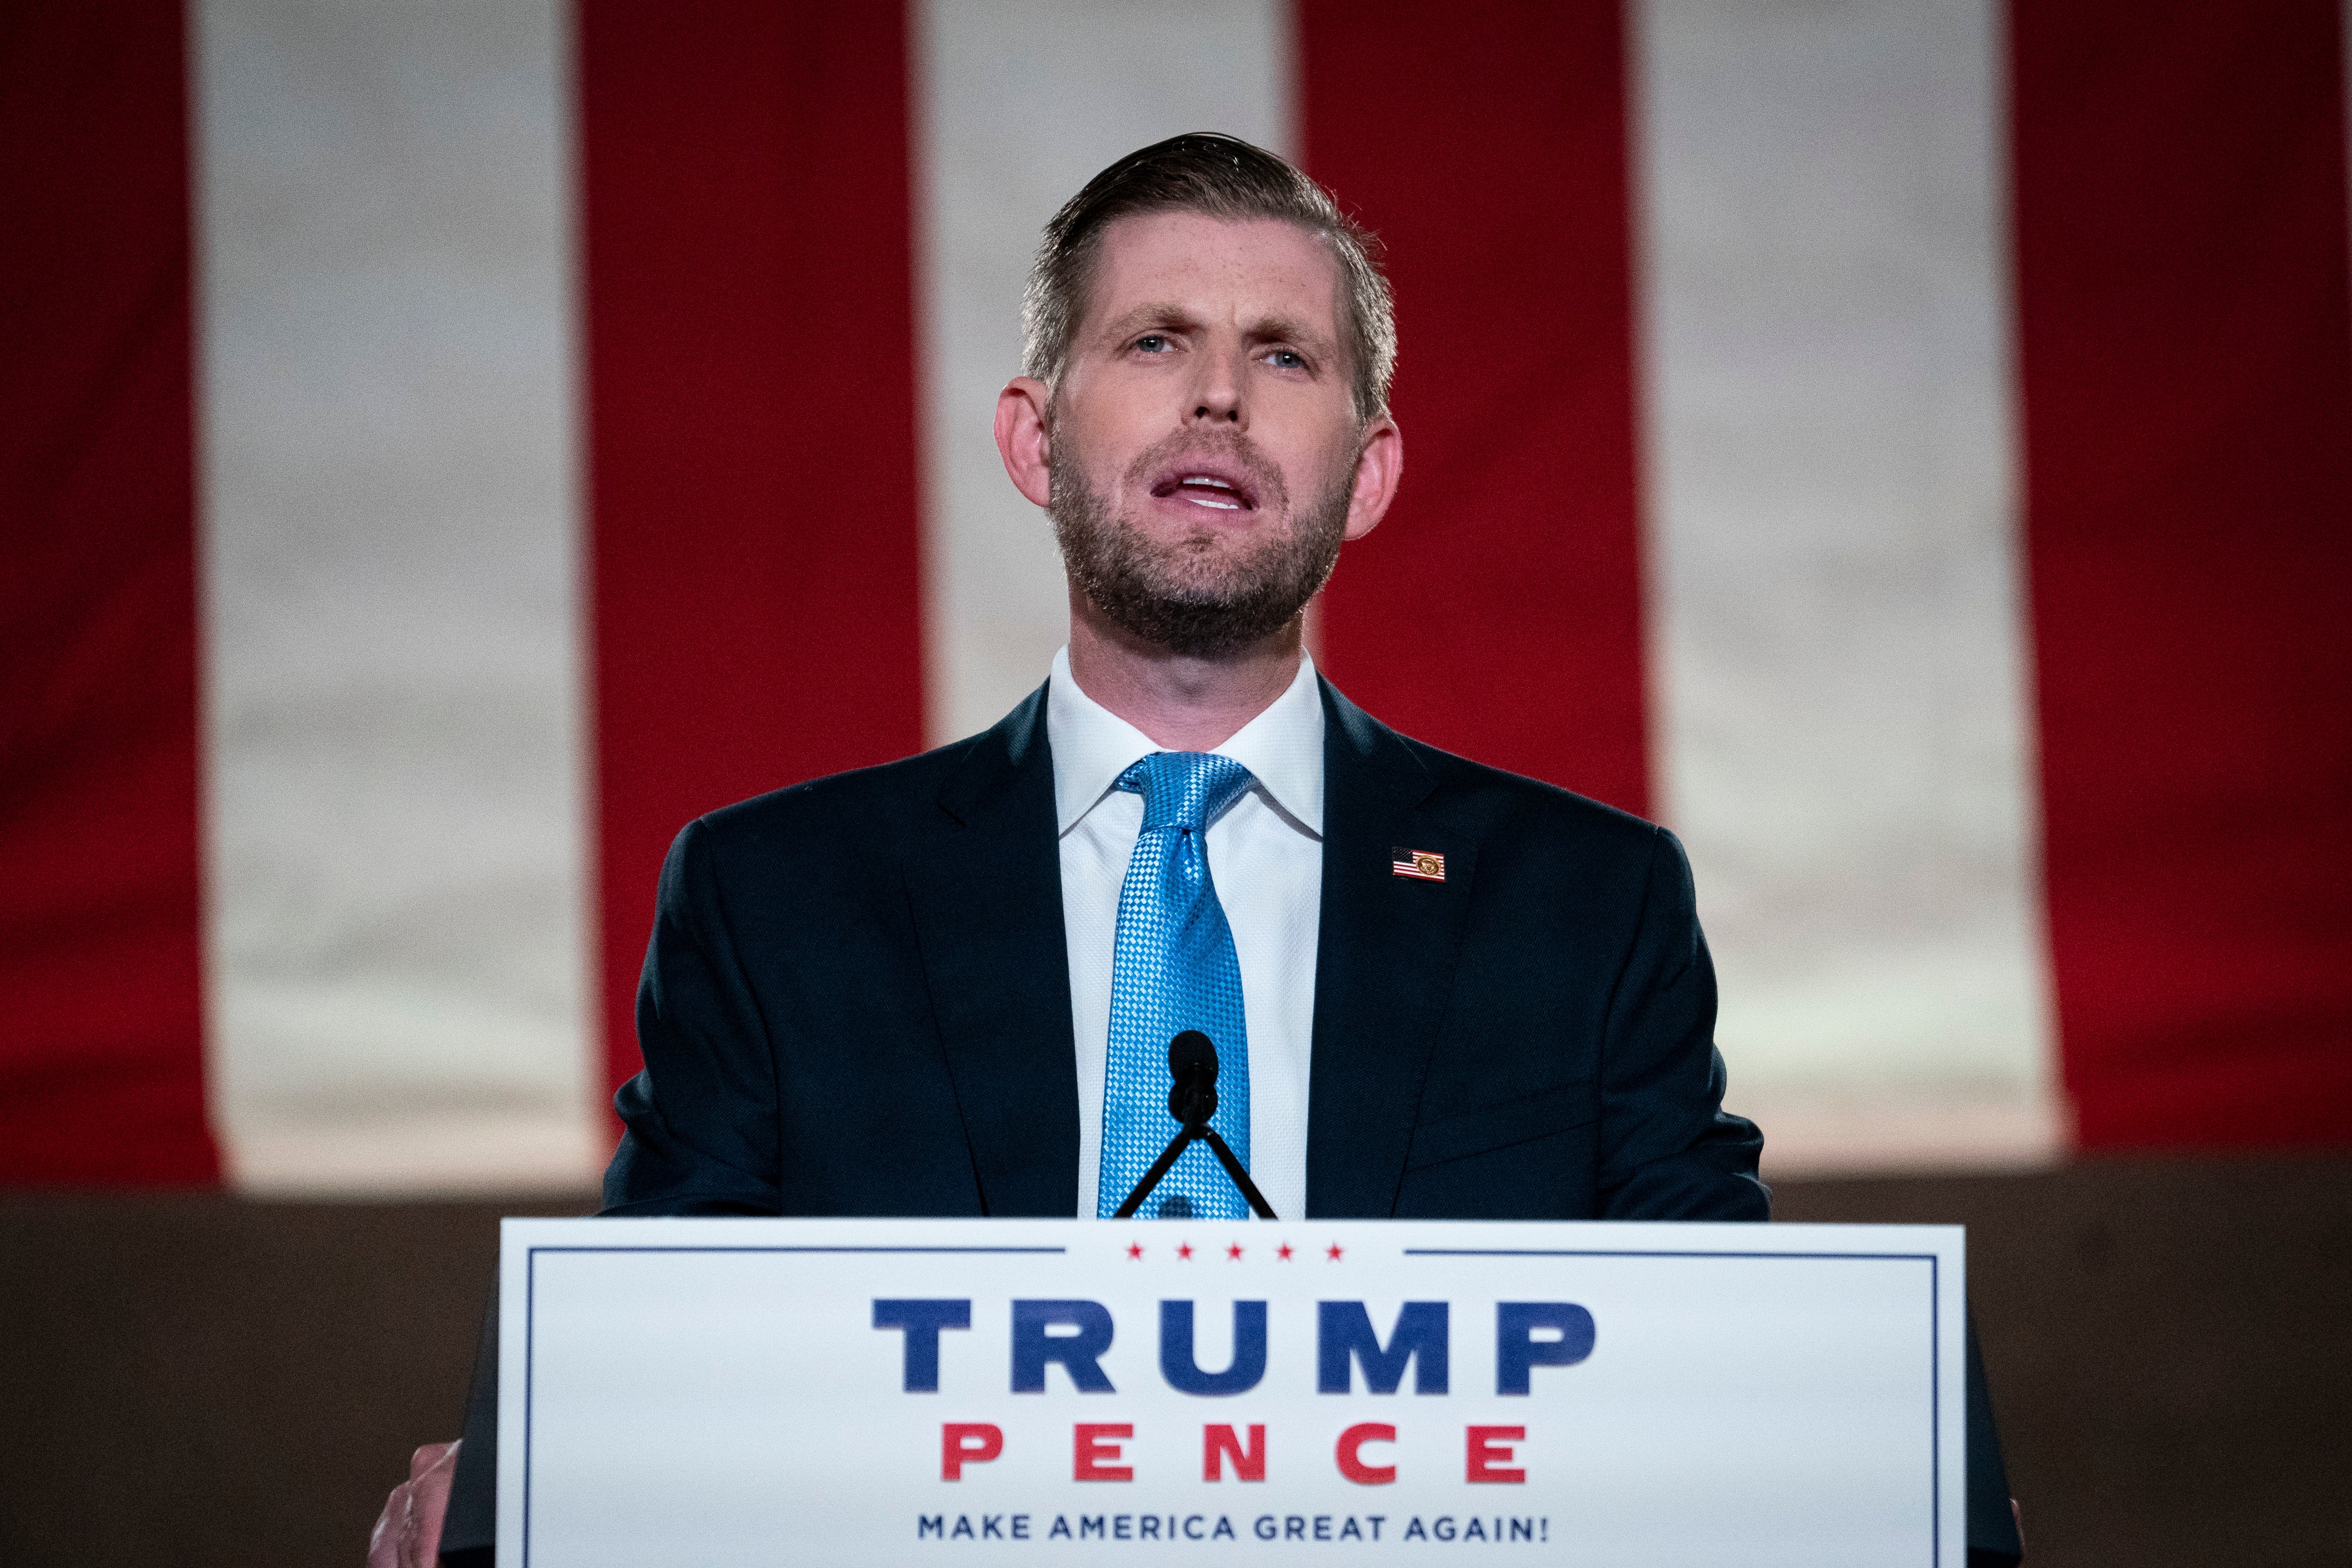 Eric Trump, son of U.S. President Donald Trump, pre-records his address to the Republican National Convention at the Mellon Auditorium on August 25, 2020 in Washington, DC.